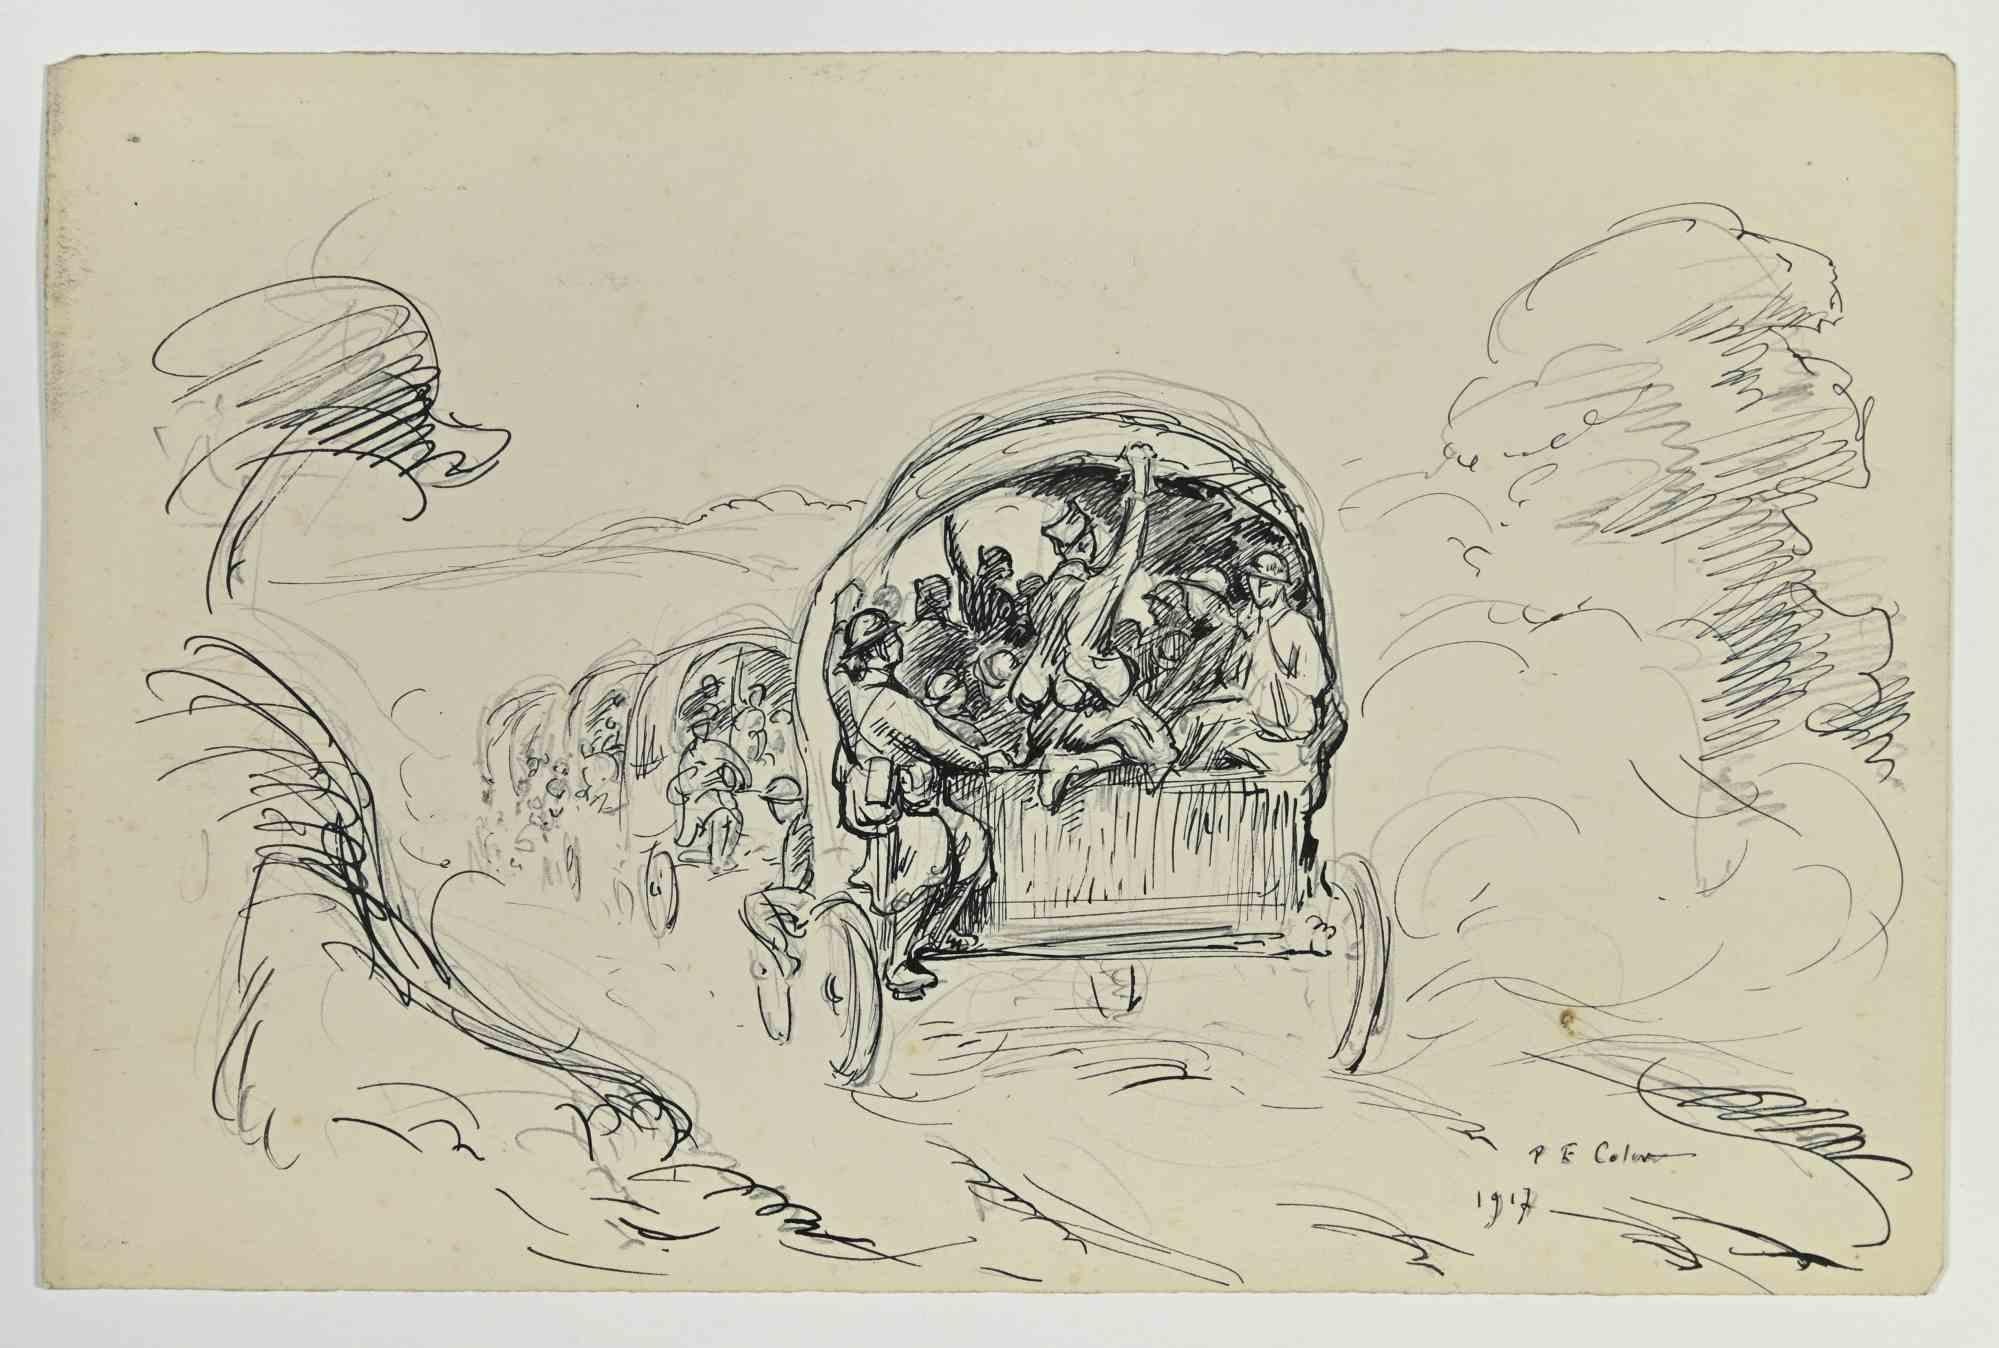 Departure of Soldiers is a drawing realized by Paul Emile Colin in the Early 20th Century.

Carbon Pencil on ivory-colored paper

Hand-signed and. dated on the lower.

Good conditions with slight foxing.

The artwork is realized through deft